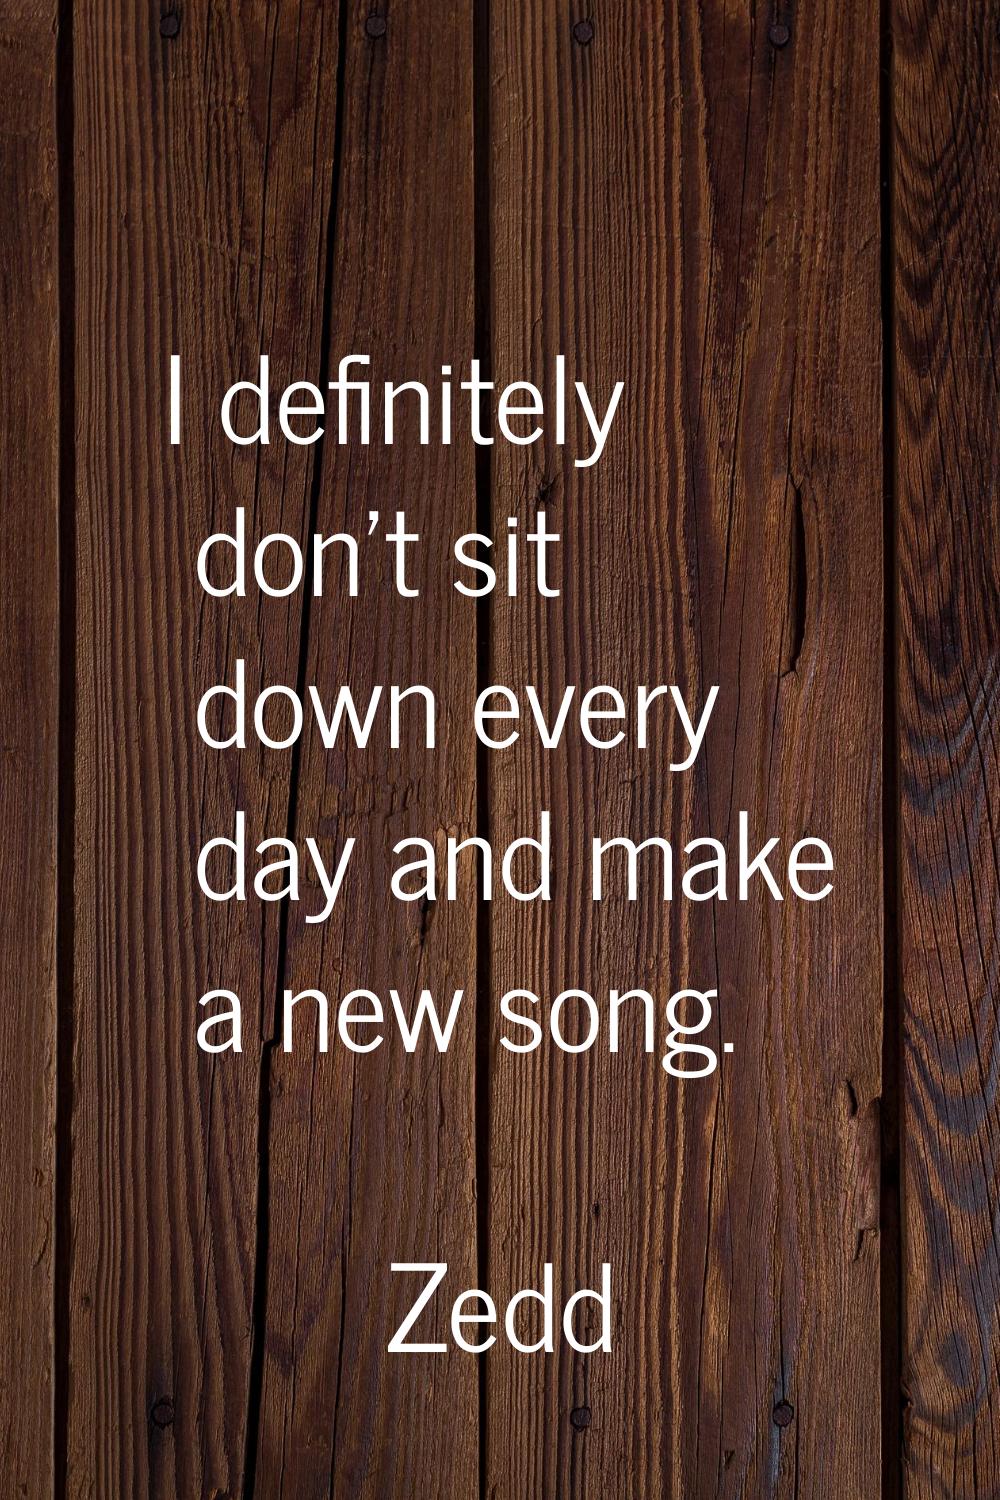 I definitely don't sit down every day and make a new song.